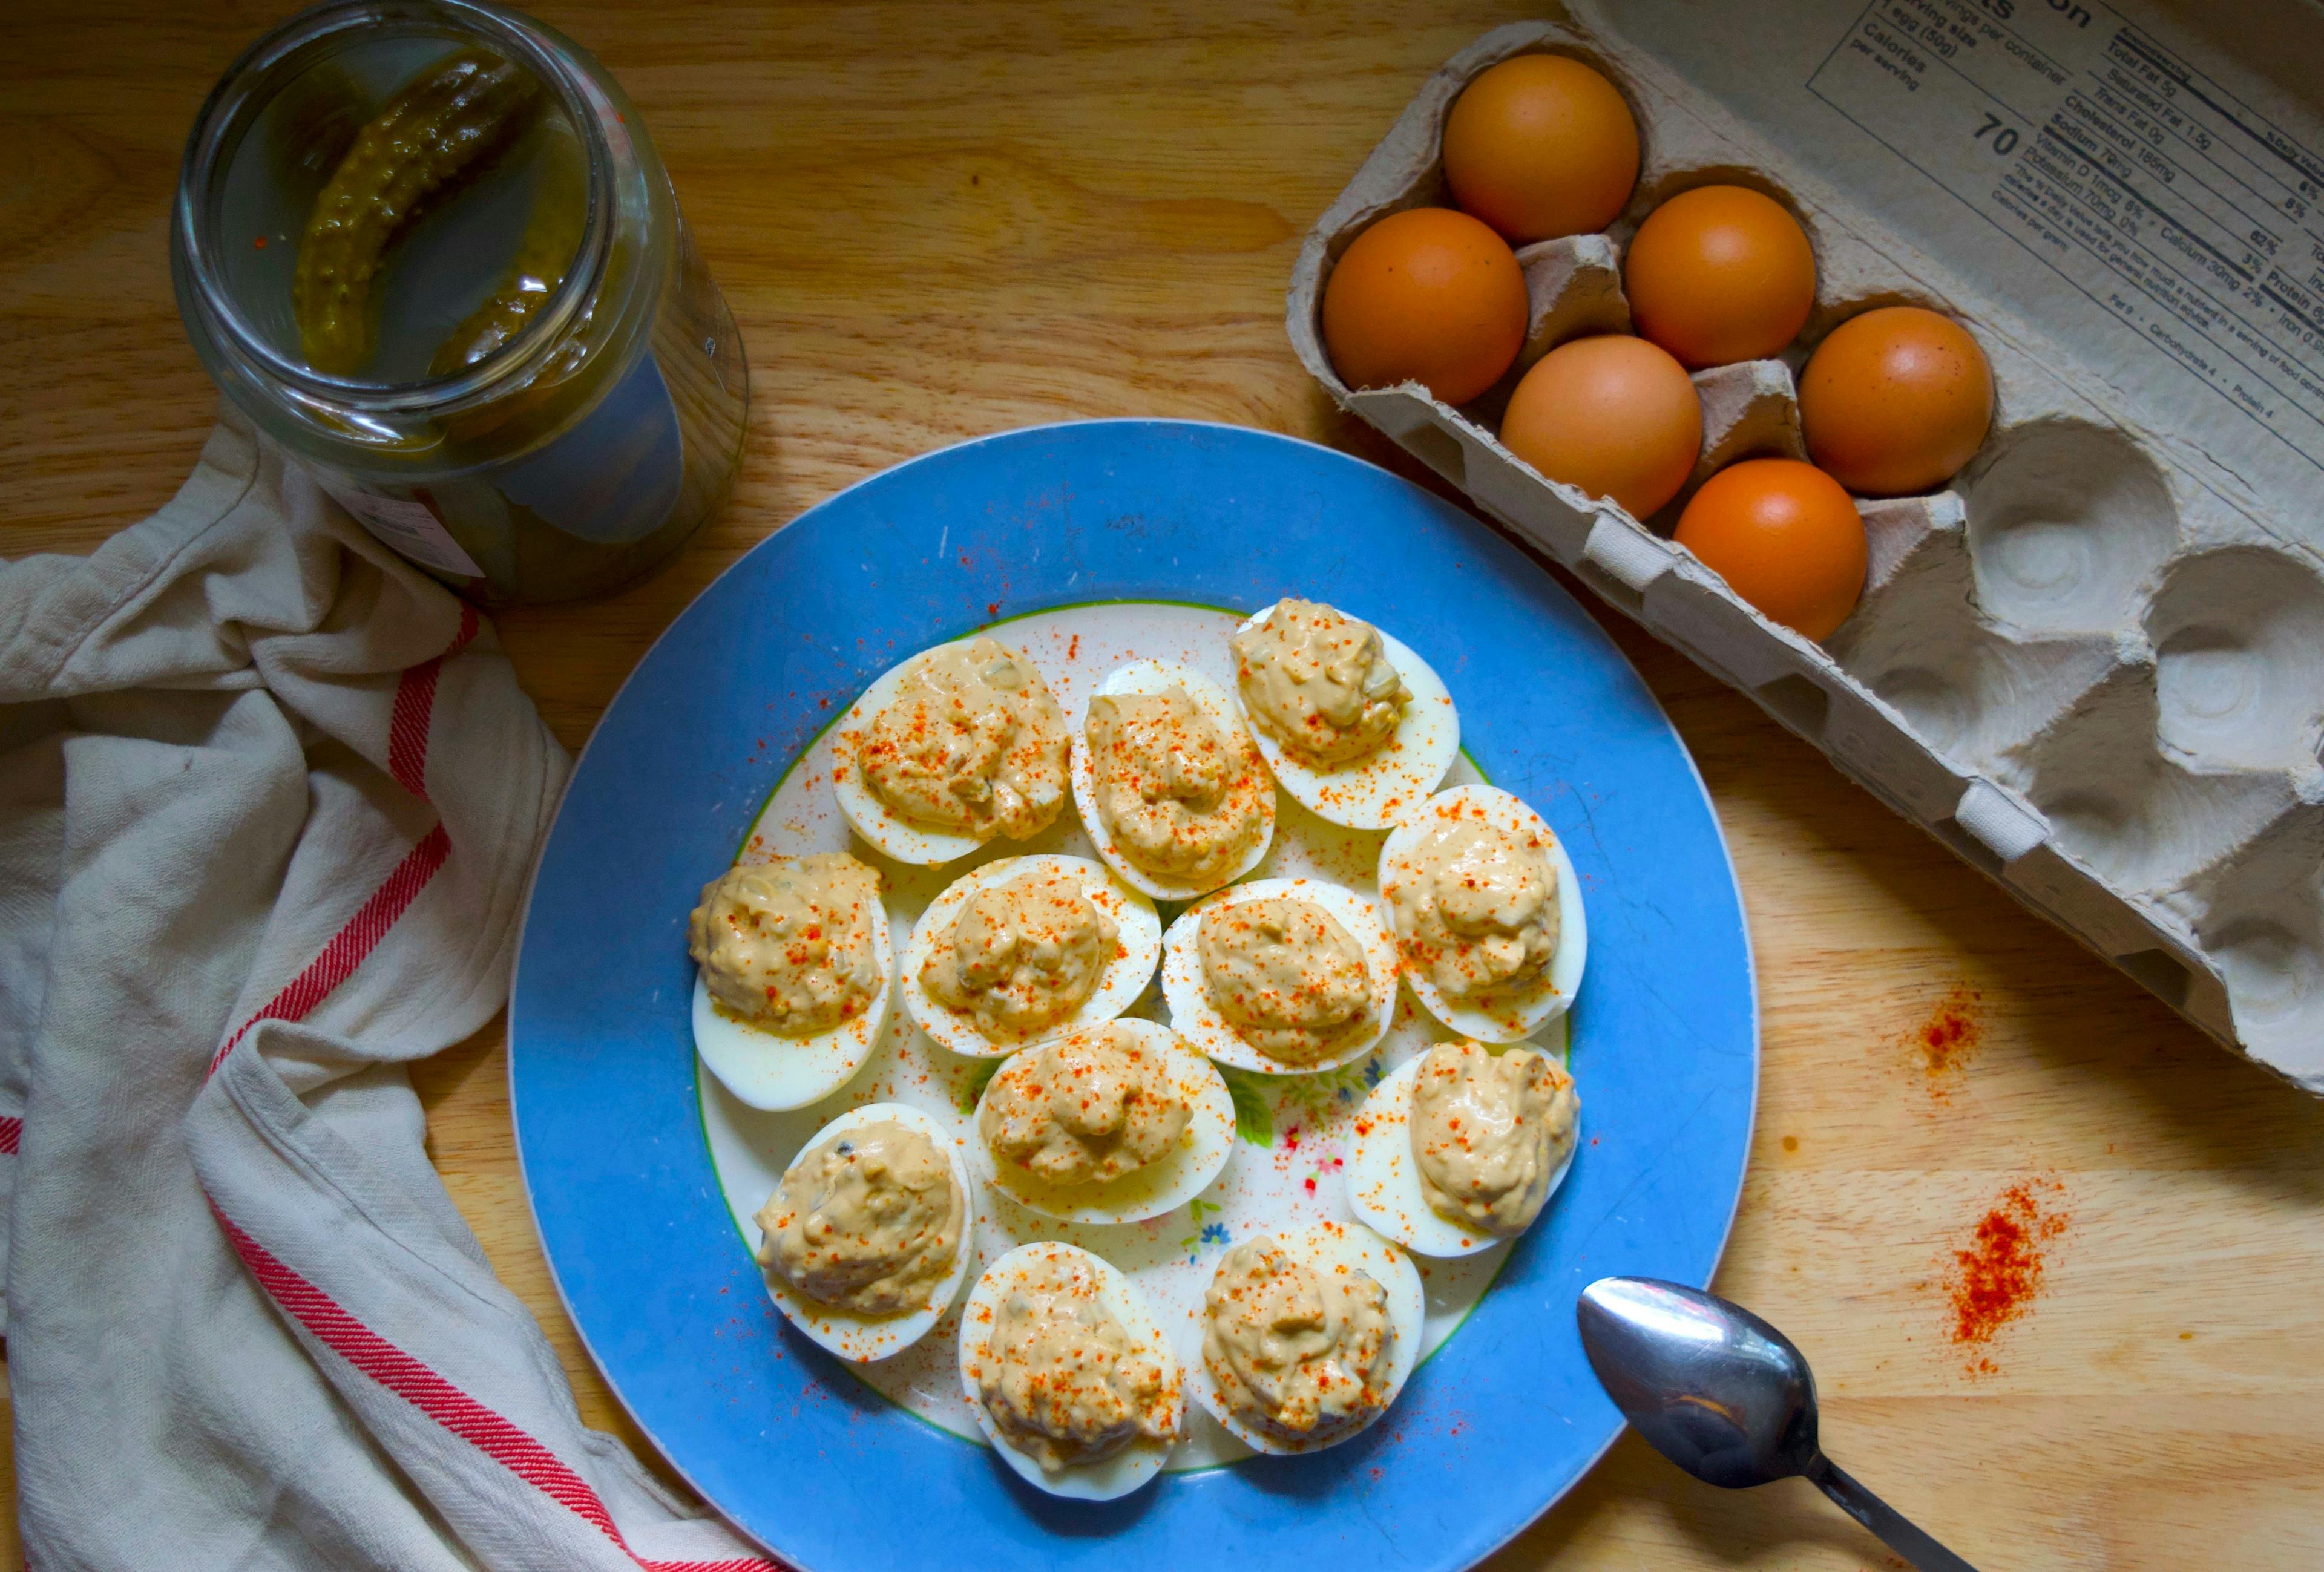 Still life with deviled eggs on a blue plate, carton of eggs to the side, jar of pickles, kitchen towel, and a spoon on the plate.